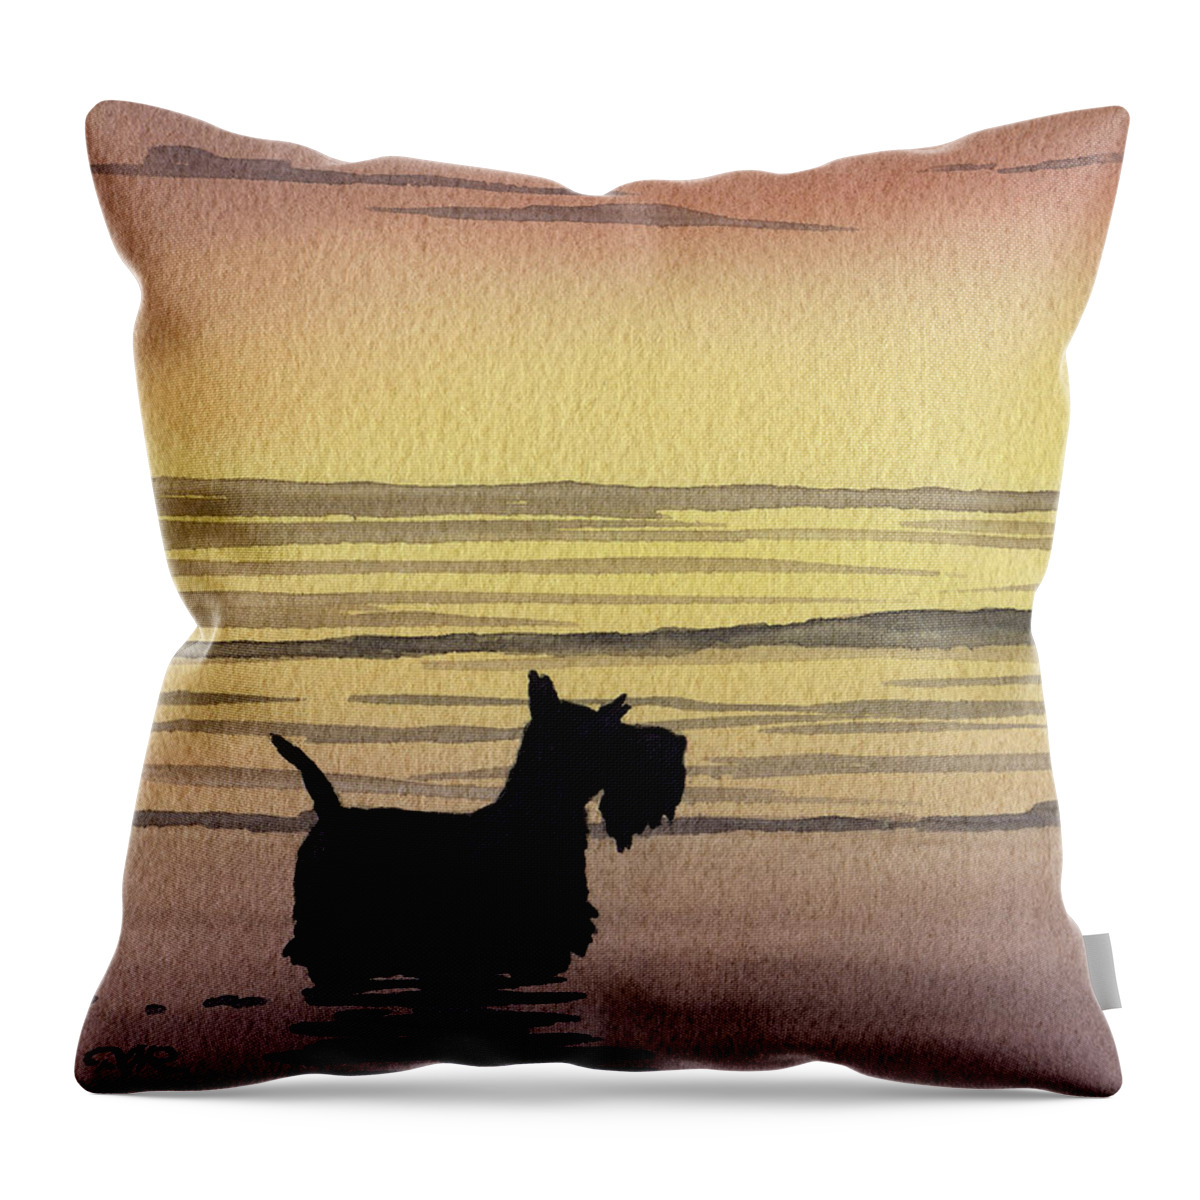 Scottish Terrier Throw Pillow featuring the painting Scottish Terrier Sunset by David Rogers